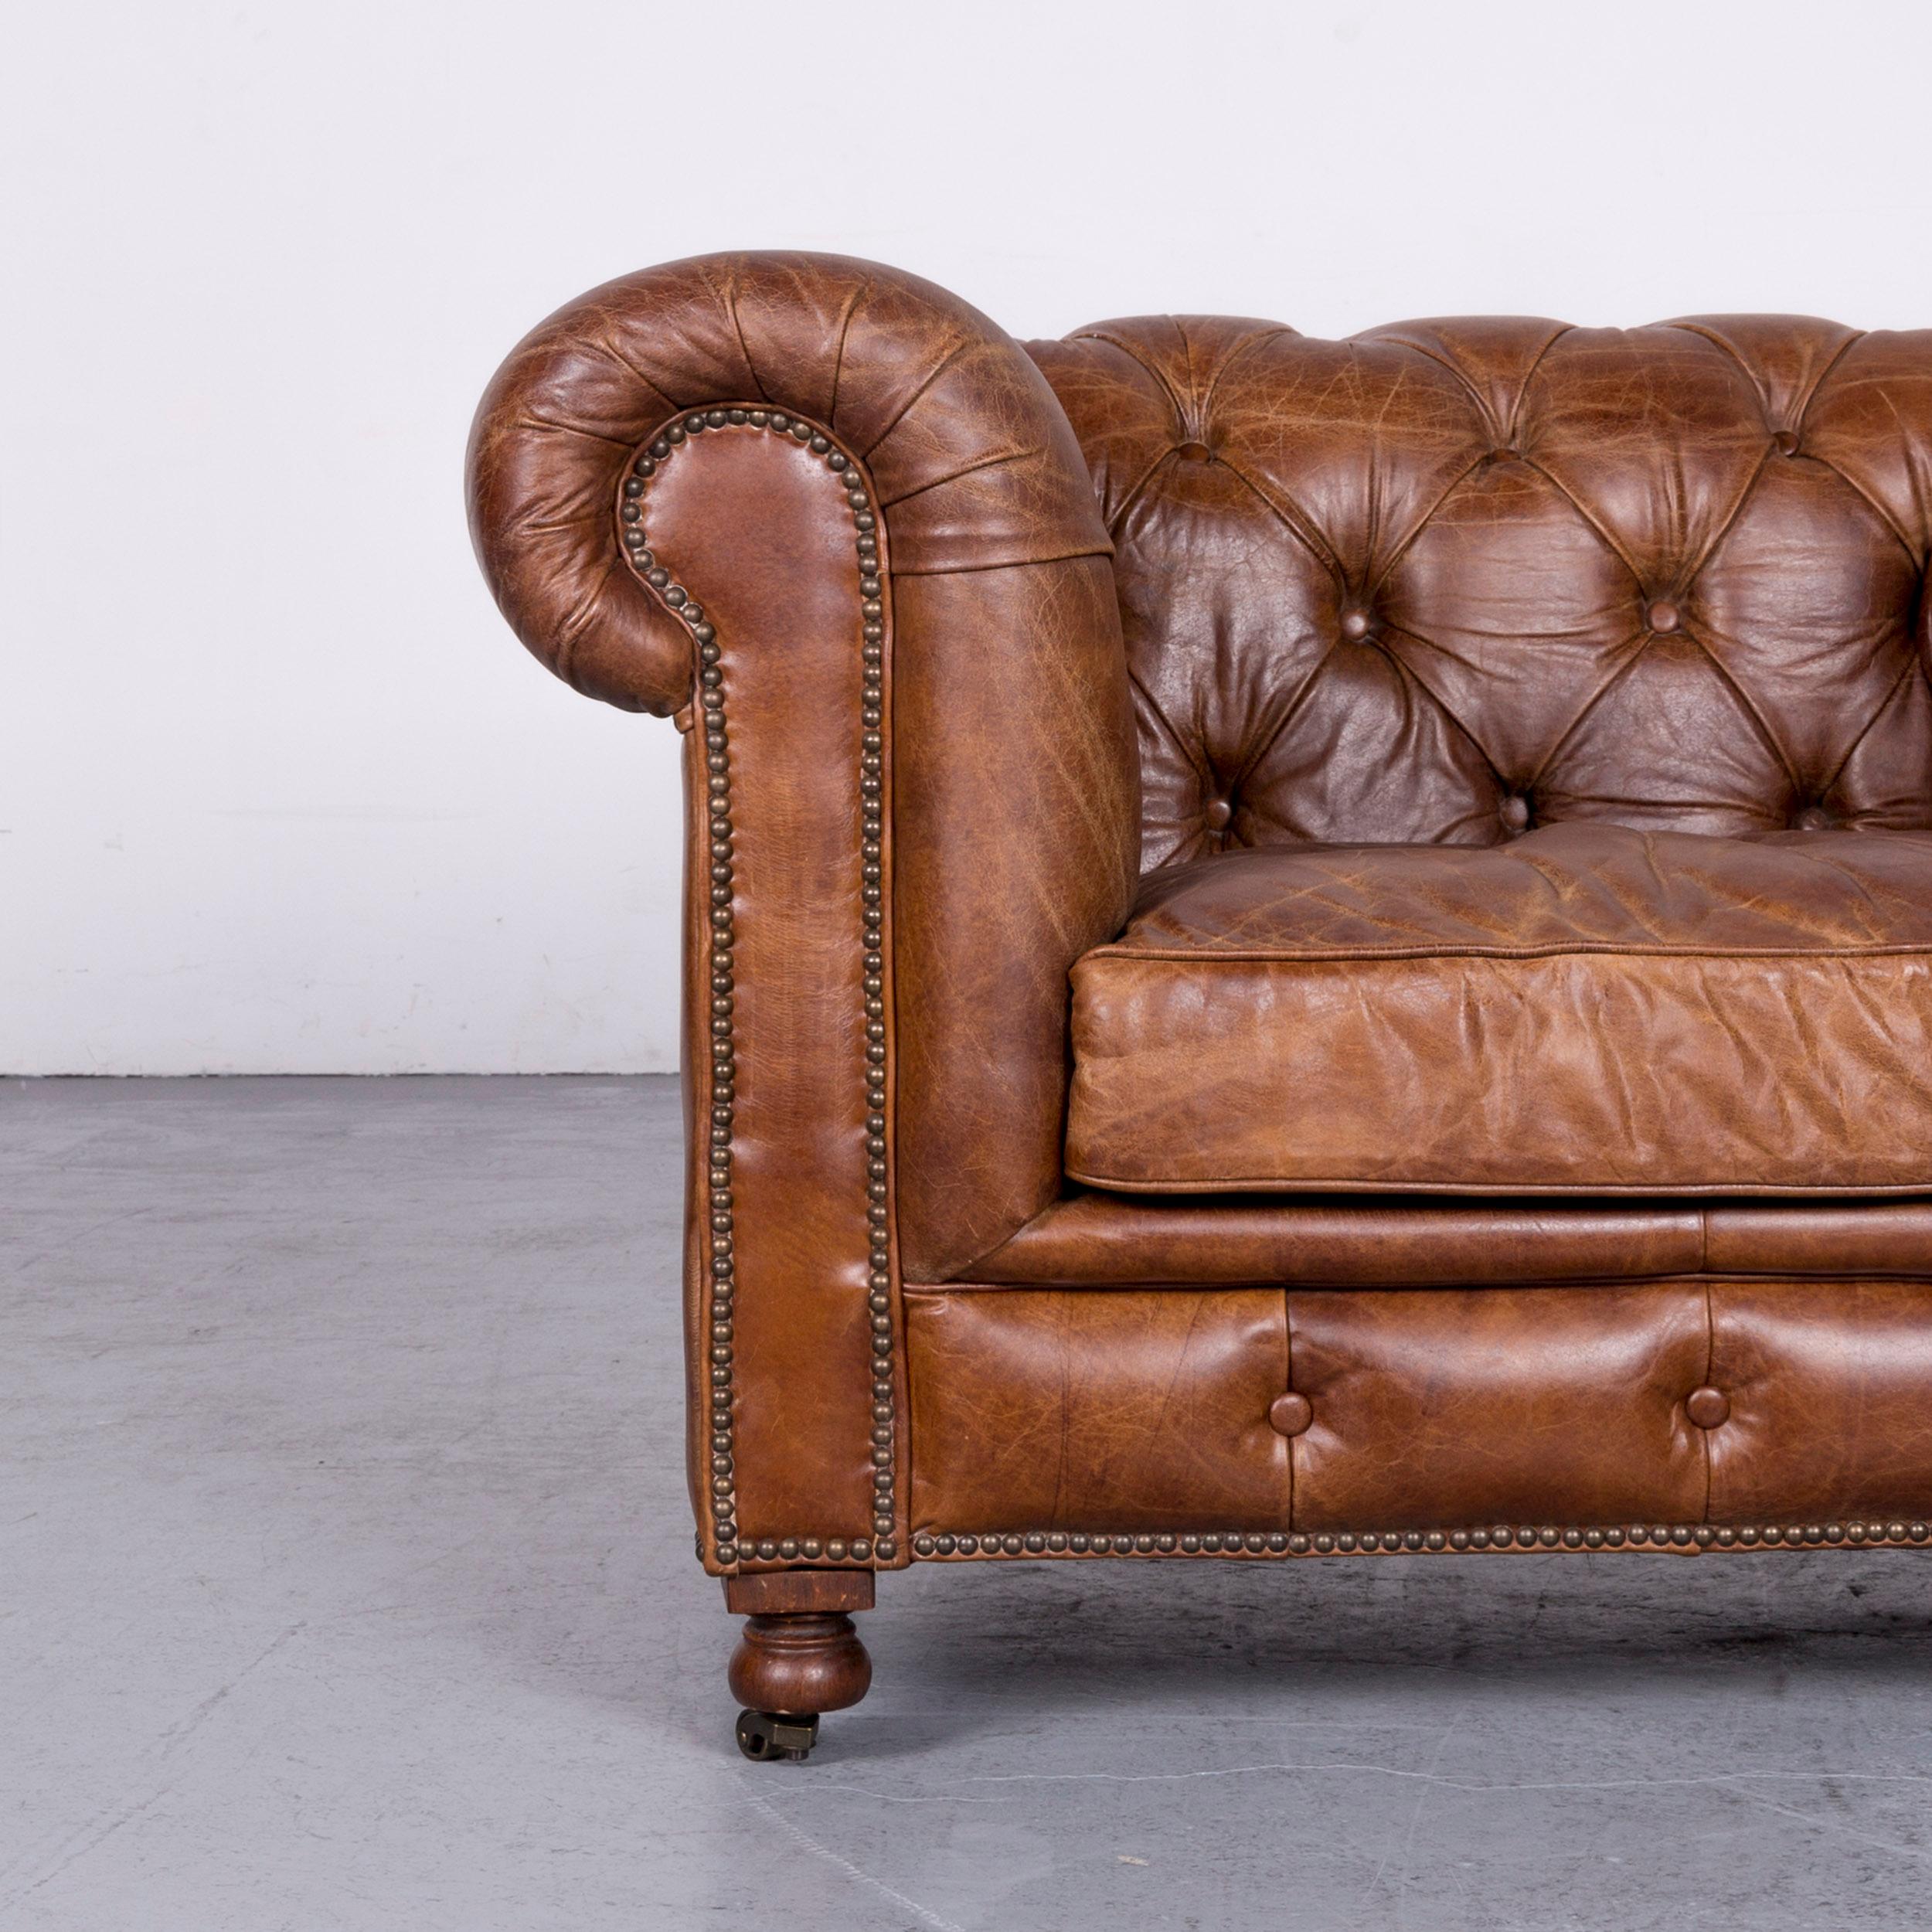 British Vintage Brown Chesterfield Leather Armchair Buttoned Club Chair in Brown